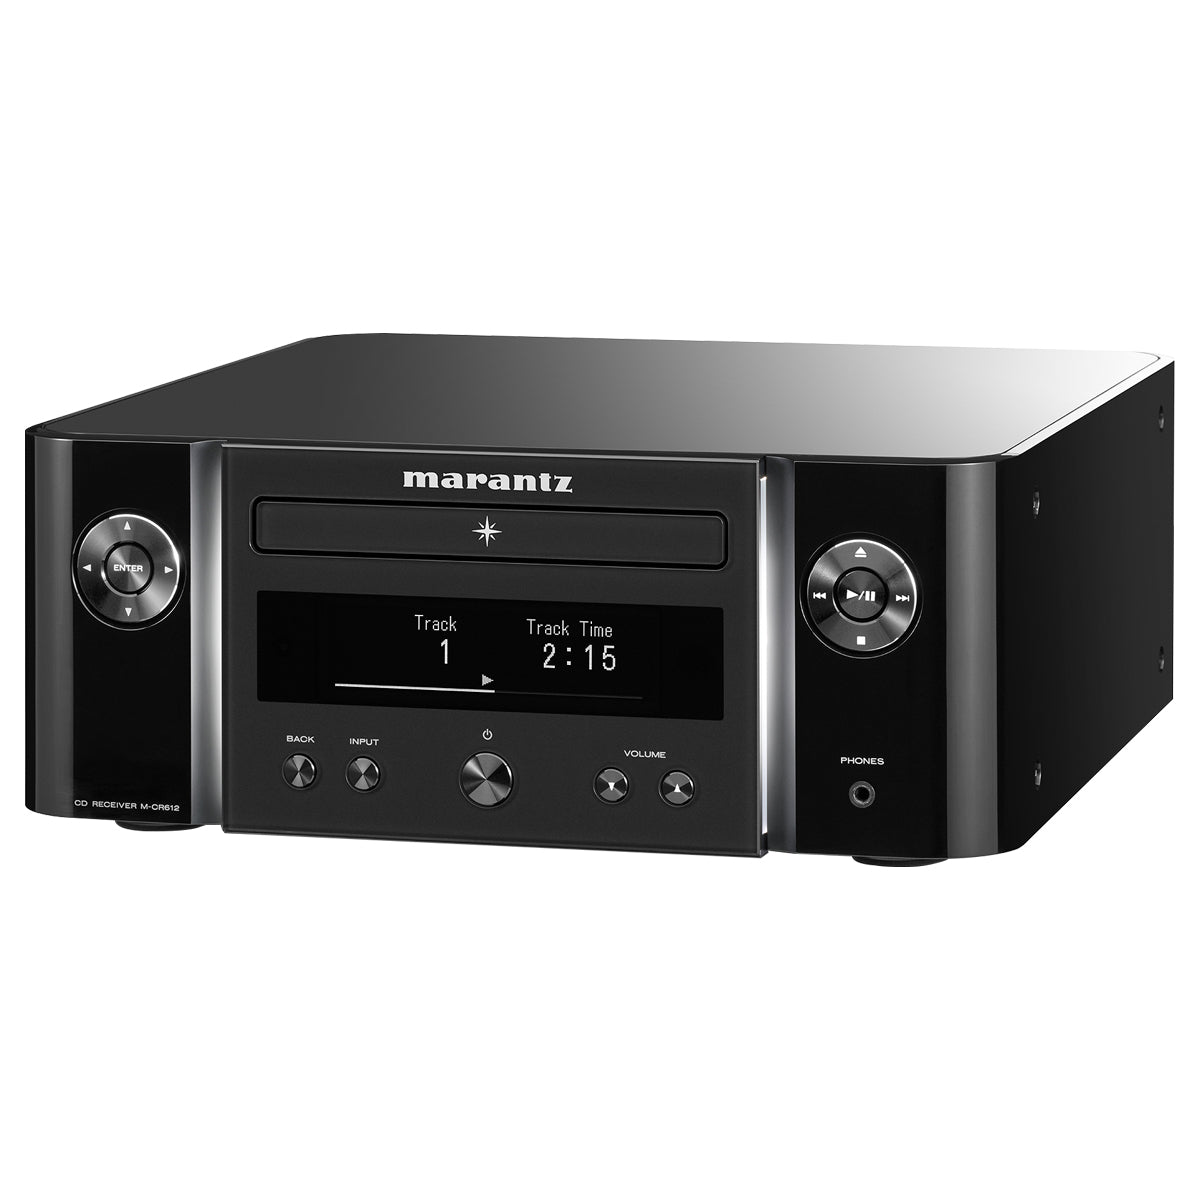 Marantz CR612 Compact Network CD Receiver with HEOS - Black - The Audio Experts